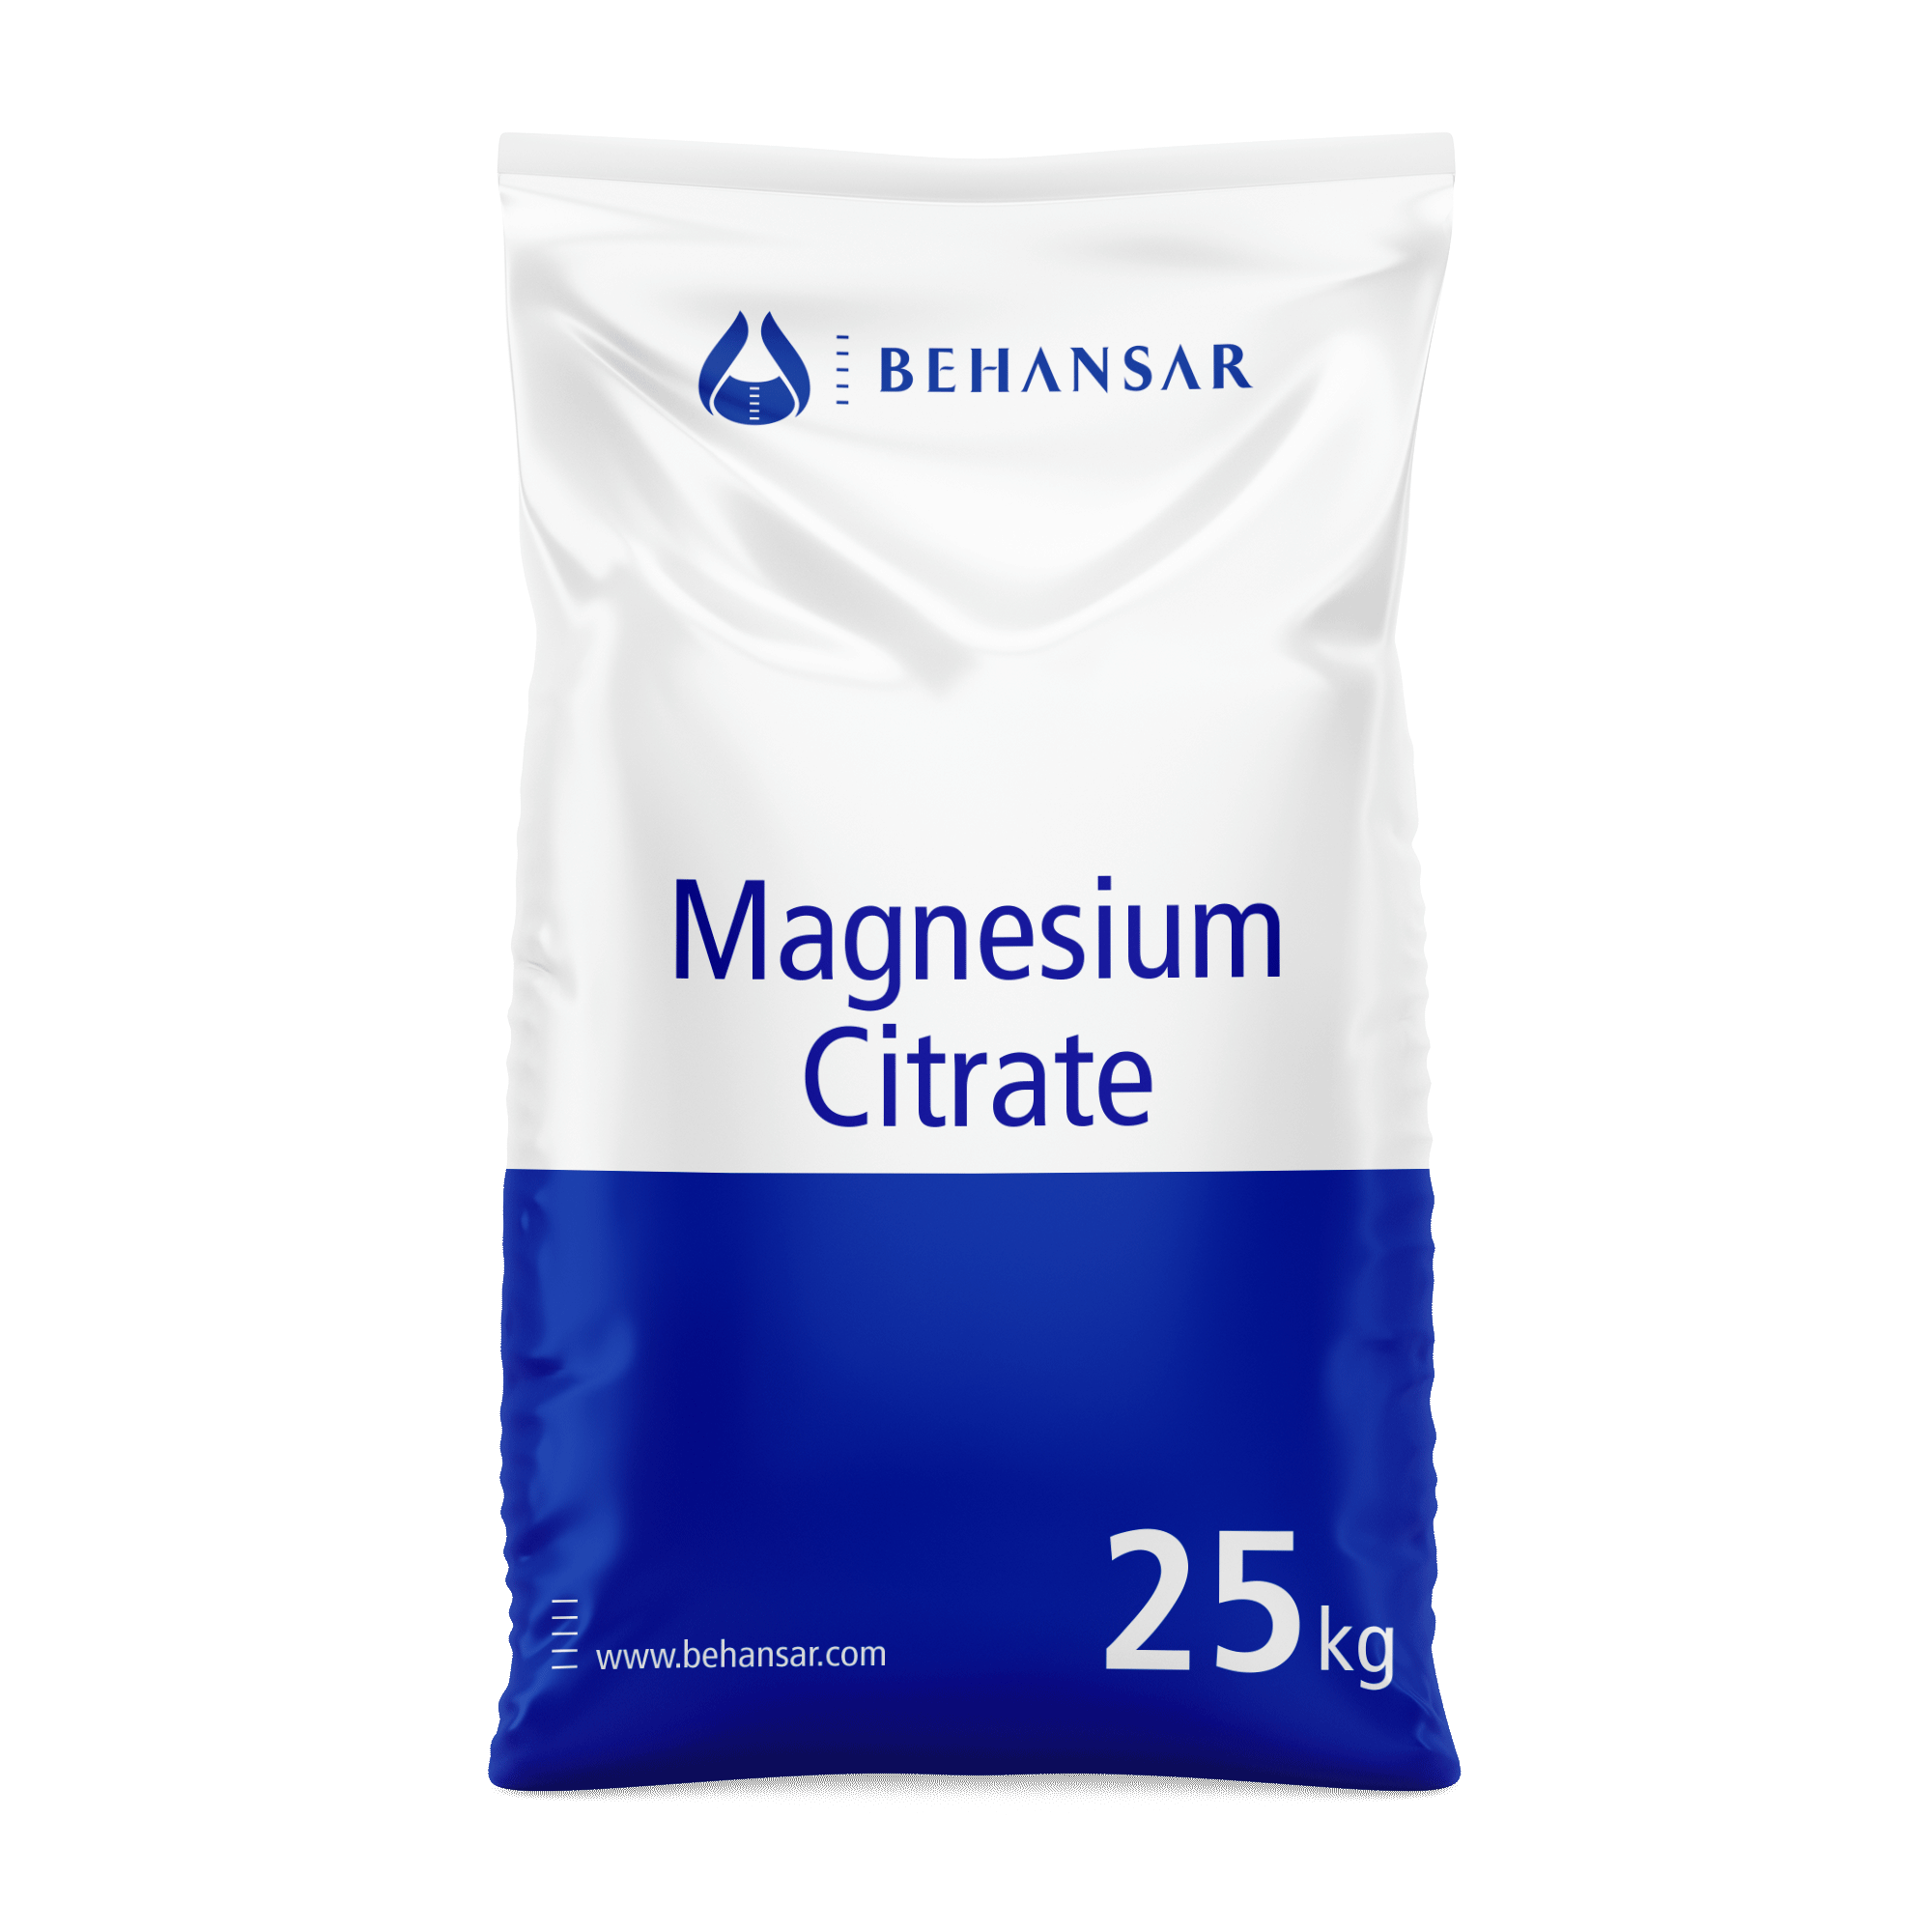 Magnesium Citrate is one of the products of Behansar Co